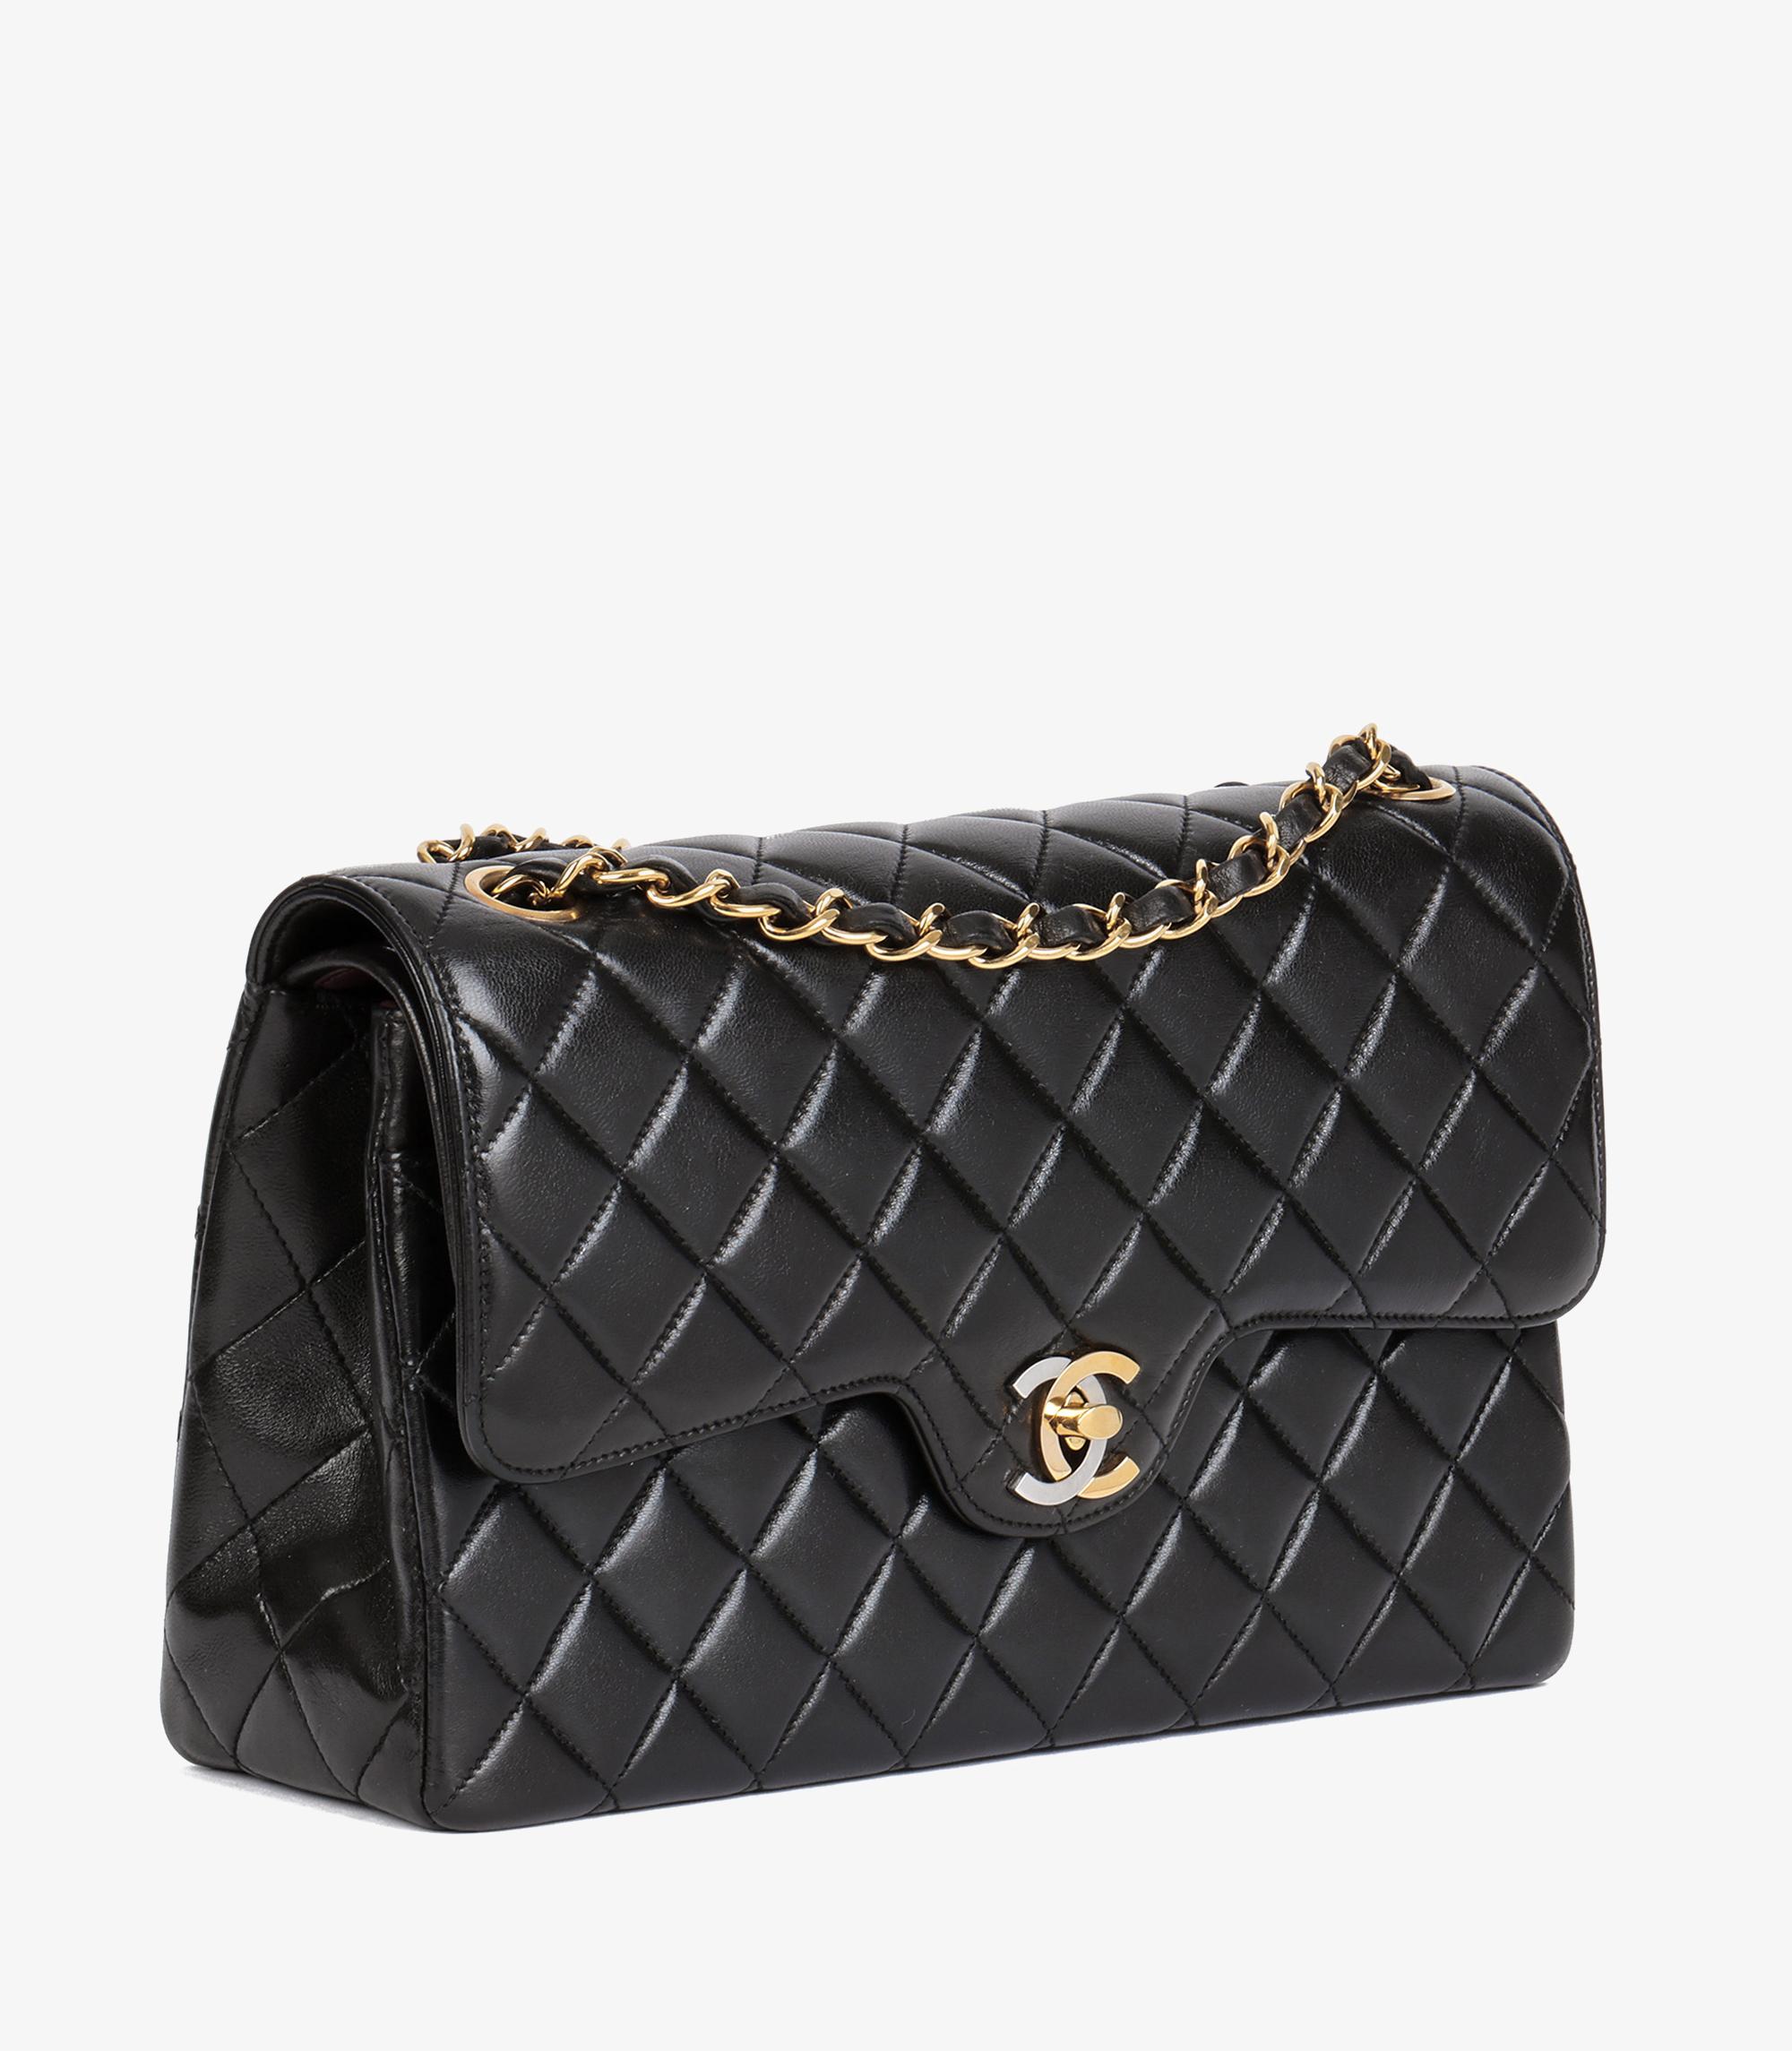 Chanel Black Lambskin Vintage Medium Paris-Limited Classic Double Flap Bag In Excellent Condition For Sale In Bishop's Stortford, Hertfordshire